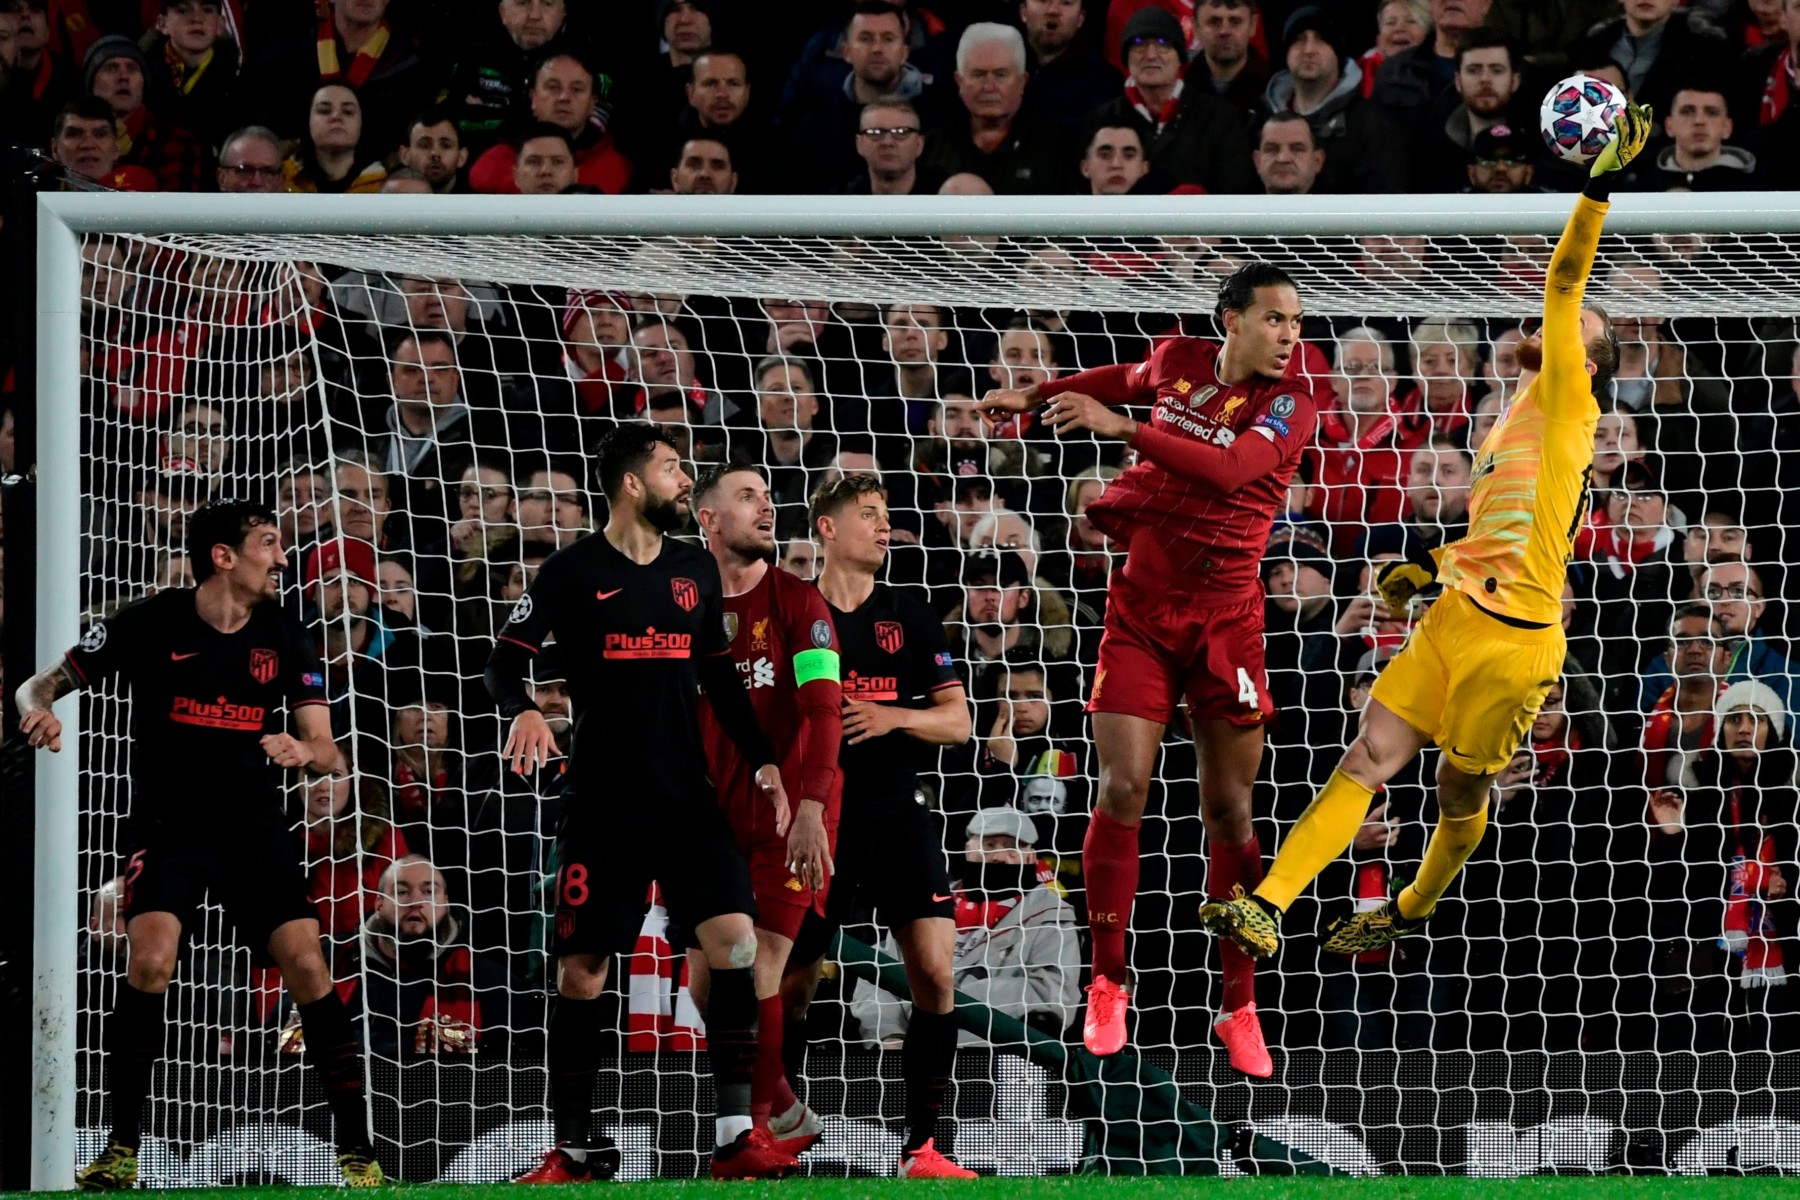 , Souness urges Chelsea to sign Jan Oblak to replace world record flop Kepa after watching masterclass against Liverpool